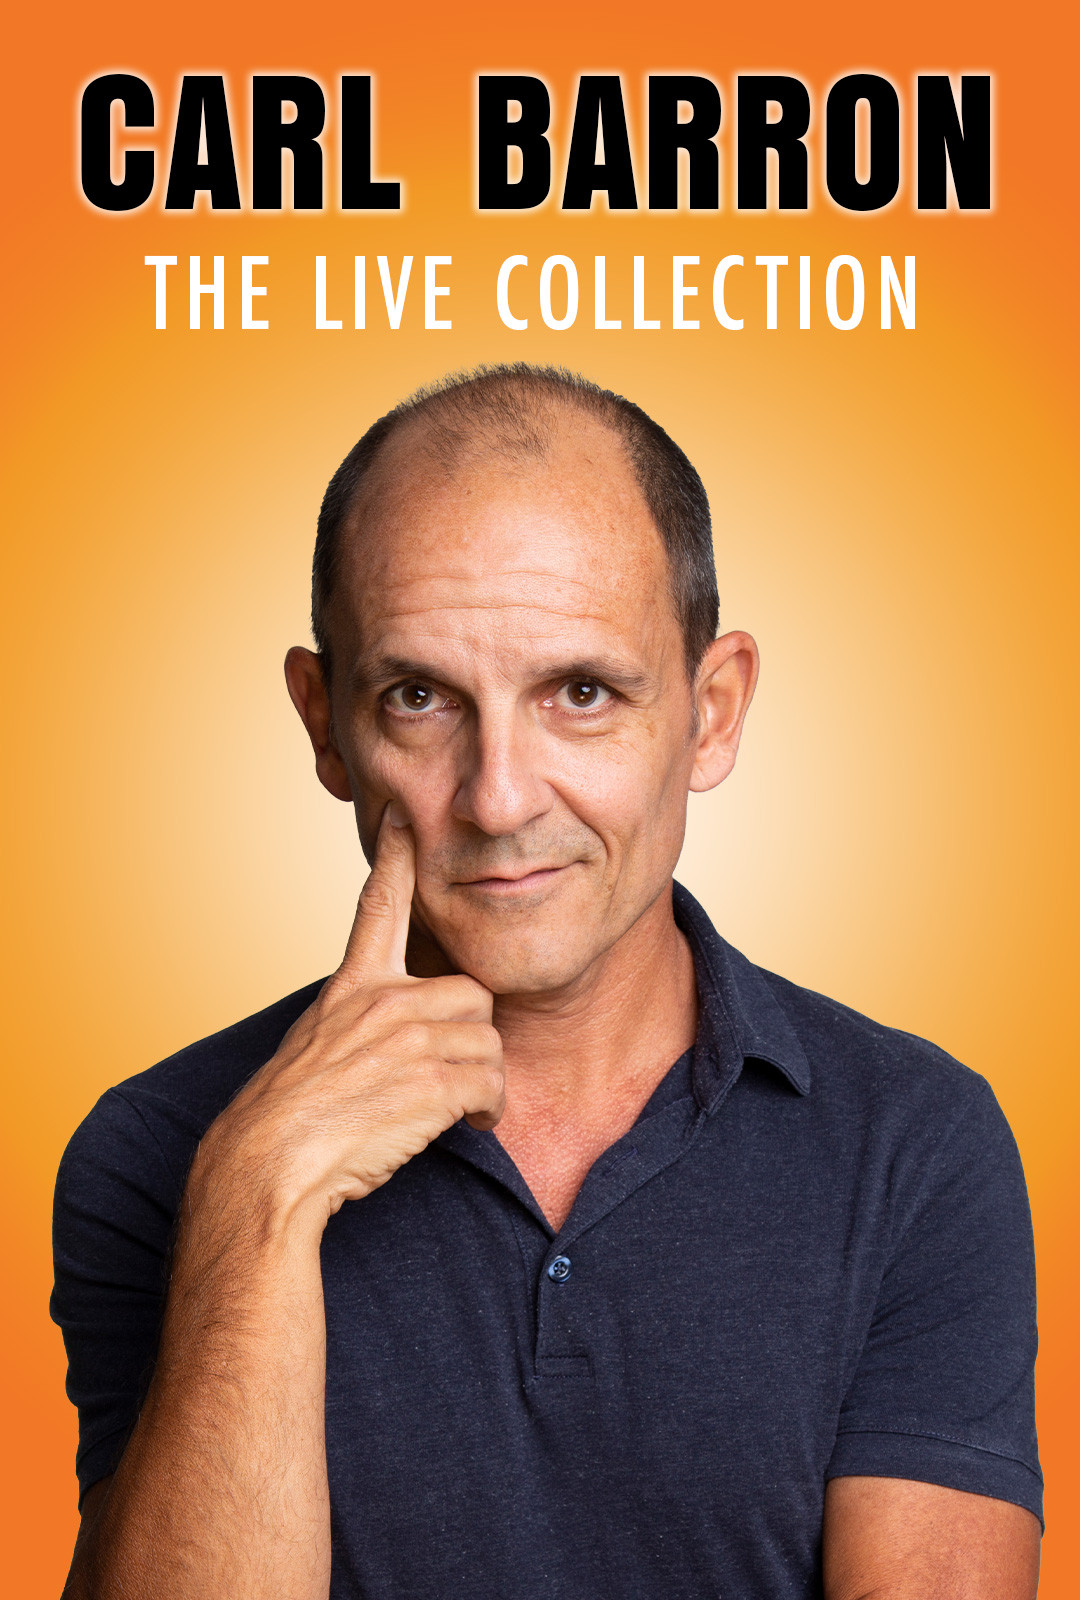 Carl Barron - The Live Collection VOD